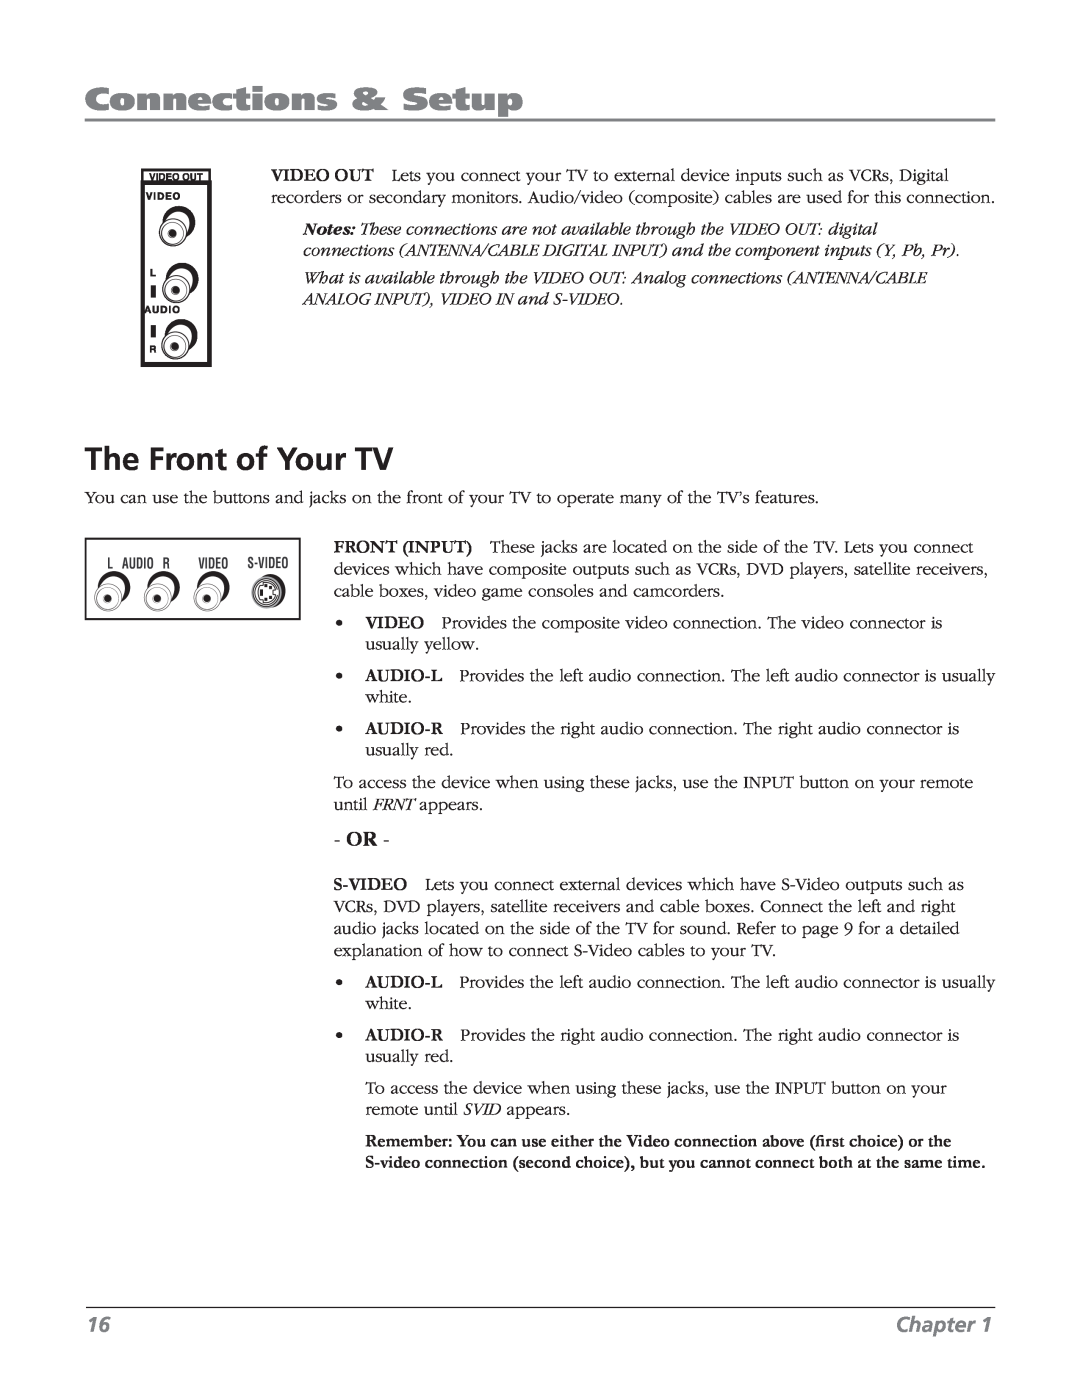 RCA 32V524T, 32v434t manual The Front of Your TV, Connections & Setup, Chapter 